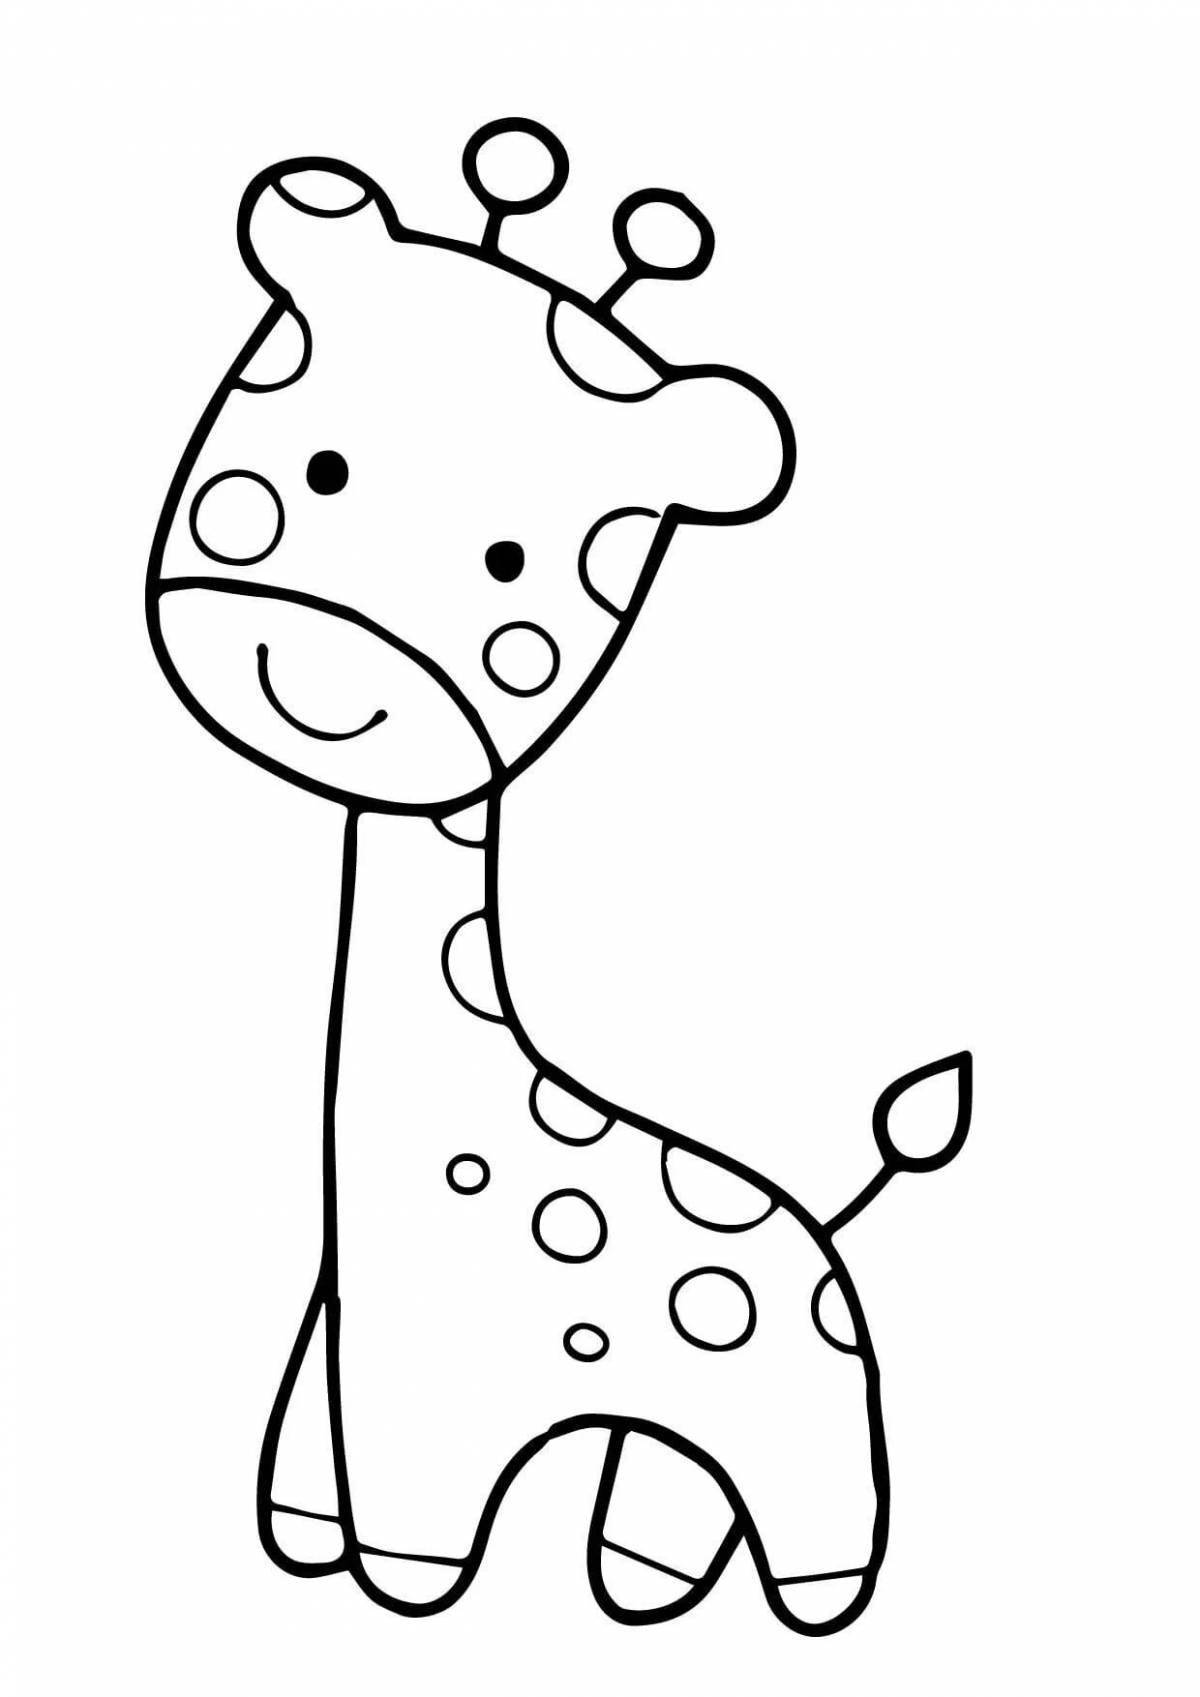 Playful animal coloring book for 3 year old boys